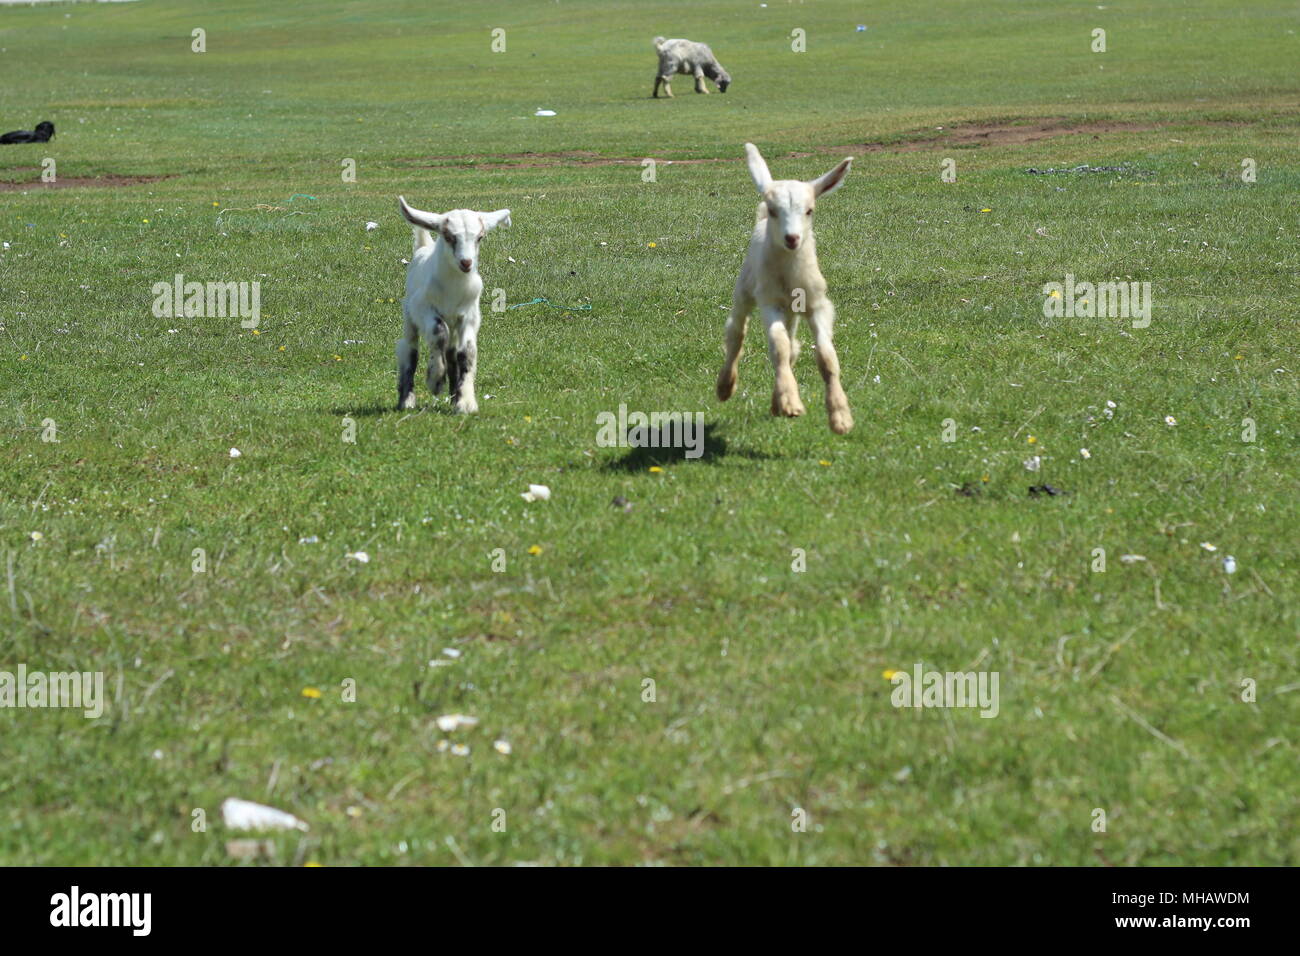 Happy jumping goats on grass Stock Photo